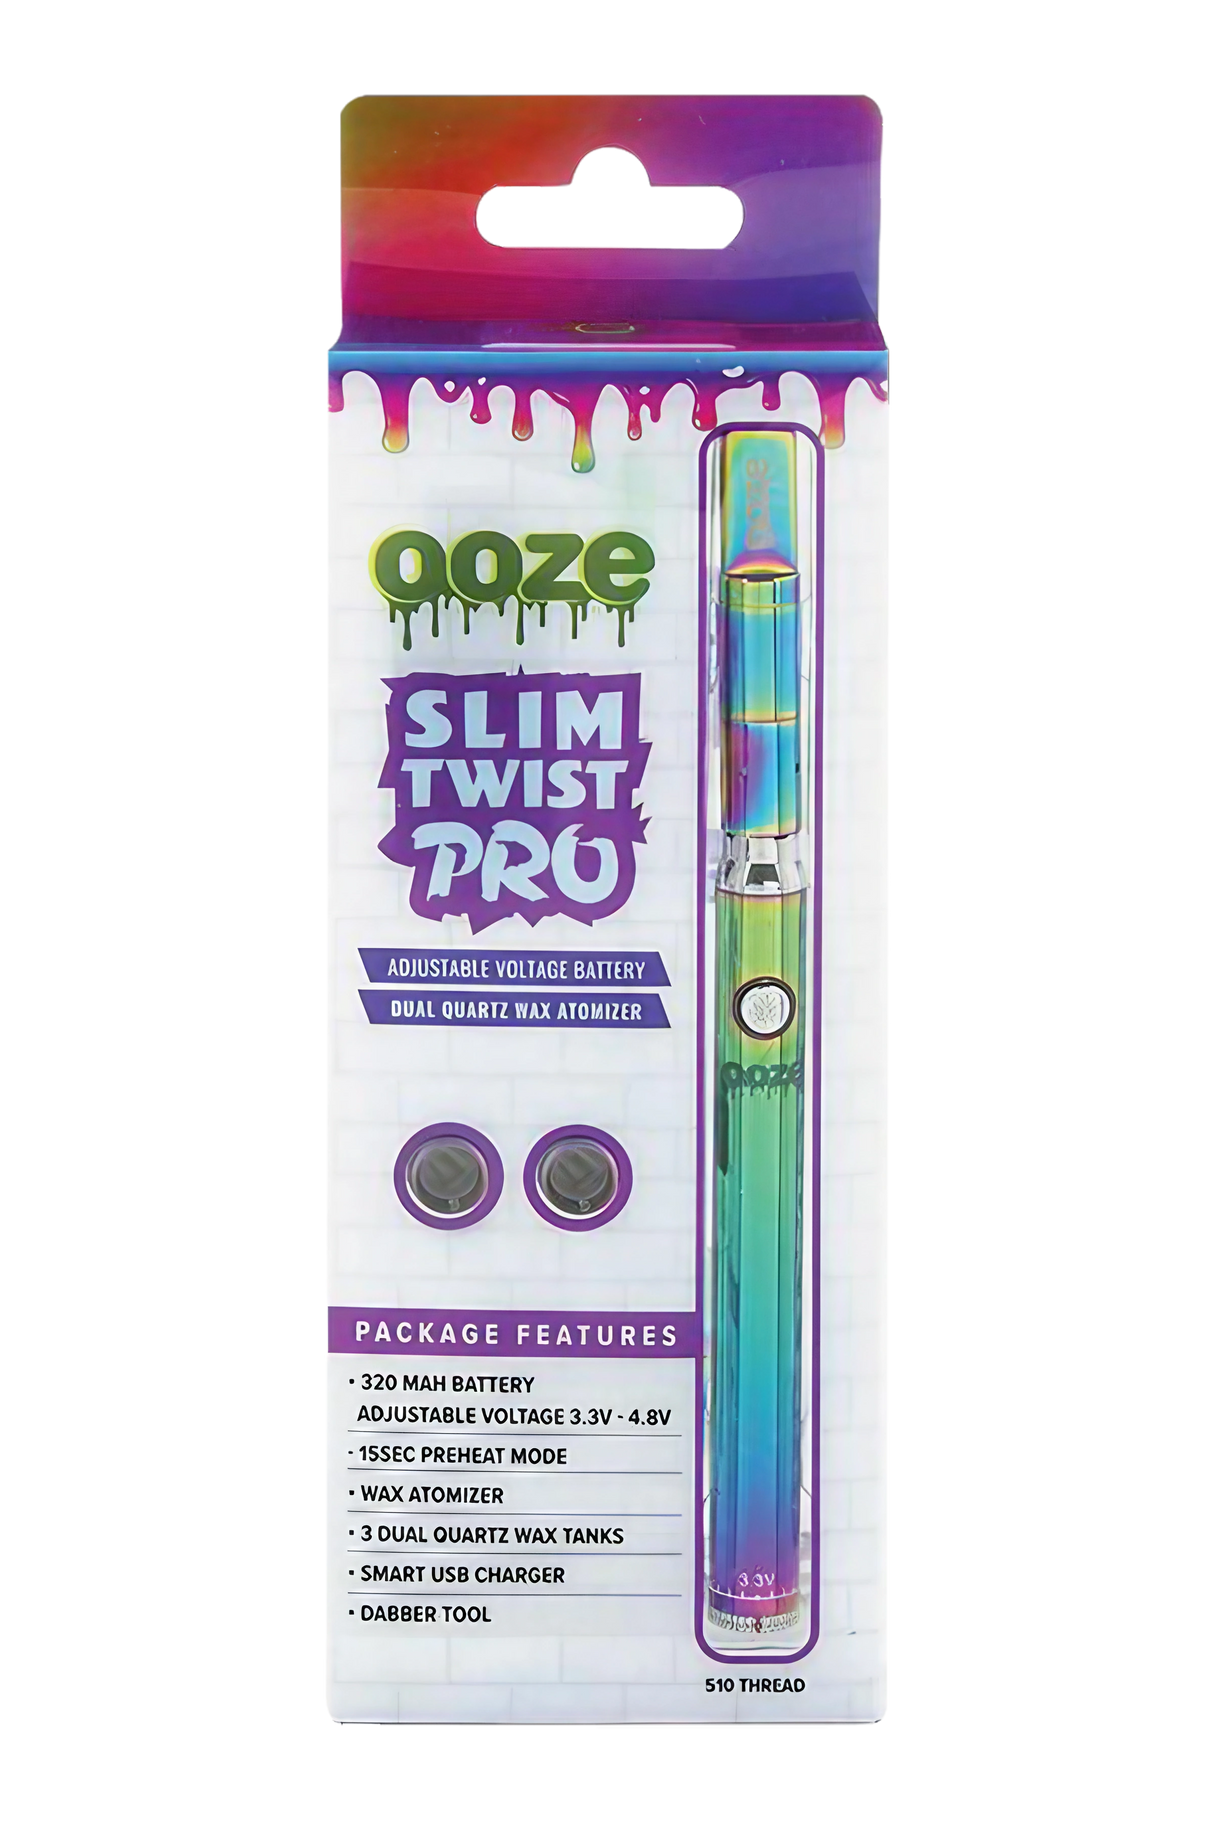 Ooze Slim Twist PRO Vape Kit with adjustable voltage battery and dual quartz atomizer, front view on white background